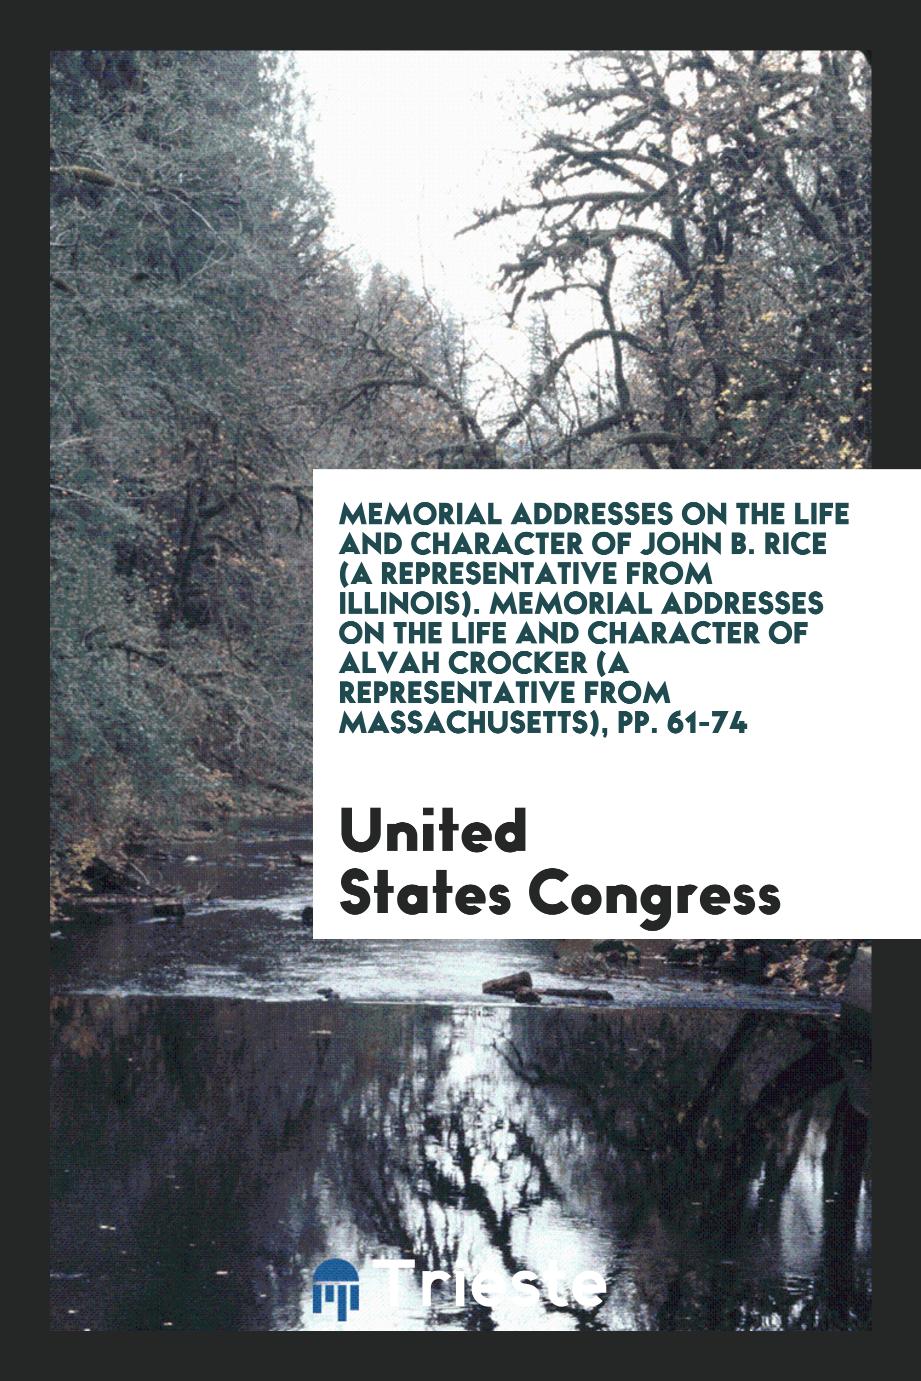 Memorial addresses on the life and character of John B. Rice (a representative from Illinois). Memorial addresses on the life and character of Alvah Crocker (a representative from Massachusetts), pp. 61-74